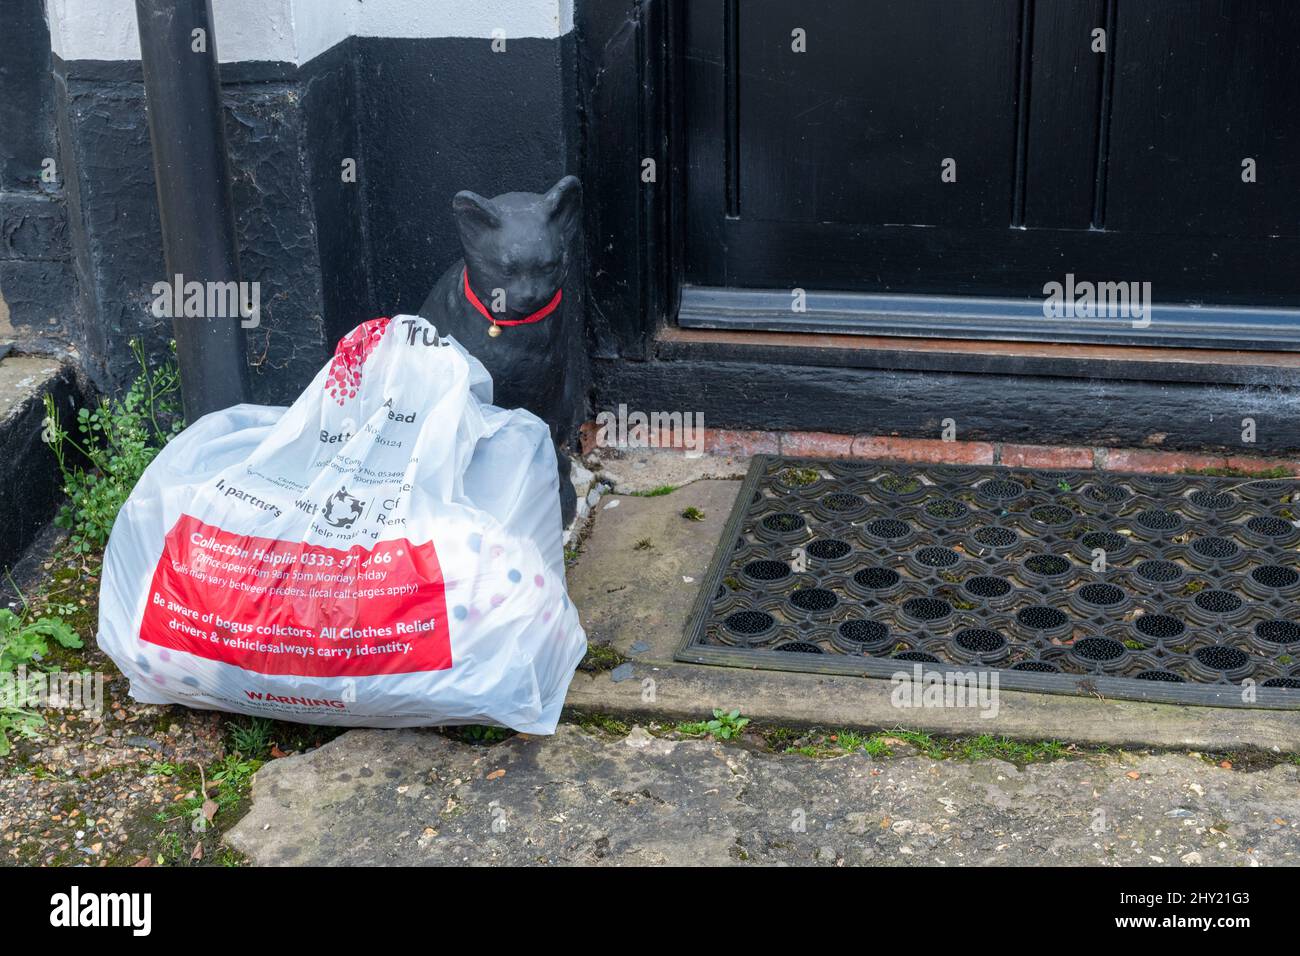 Charity bag full of donated property on a doorstep ready for collection, UK Stock Photo